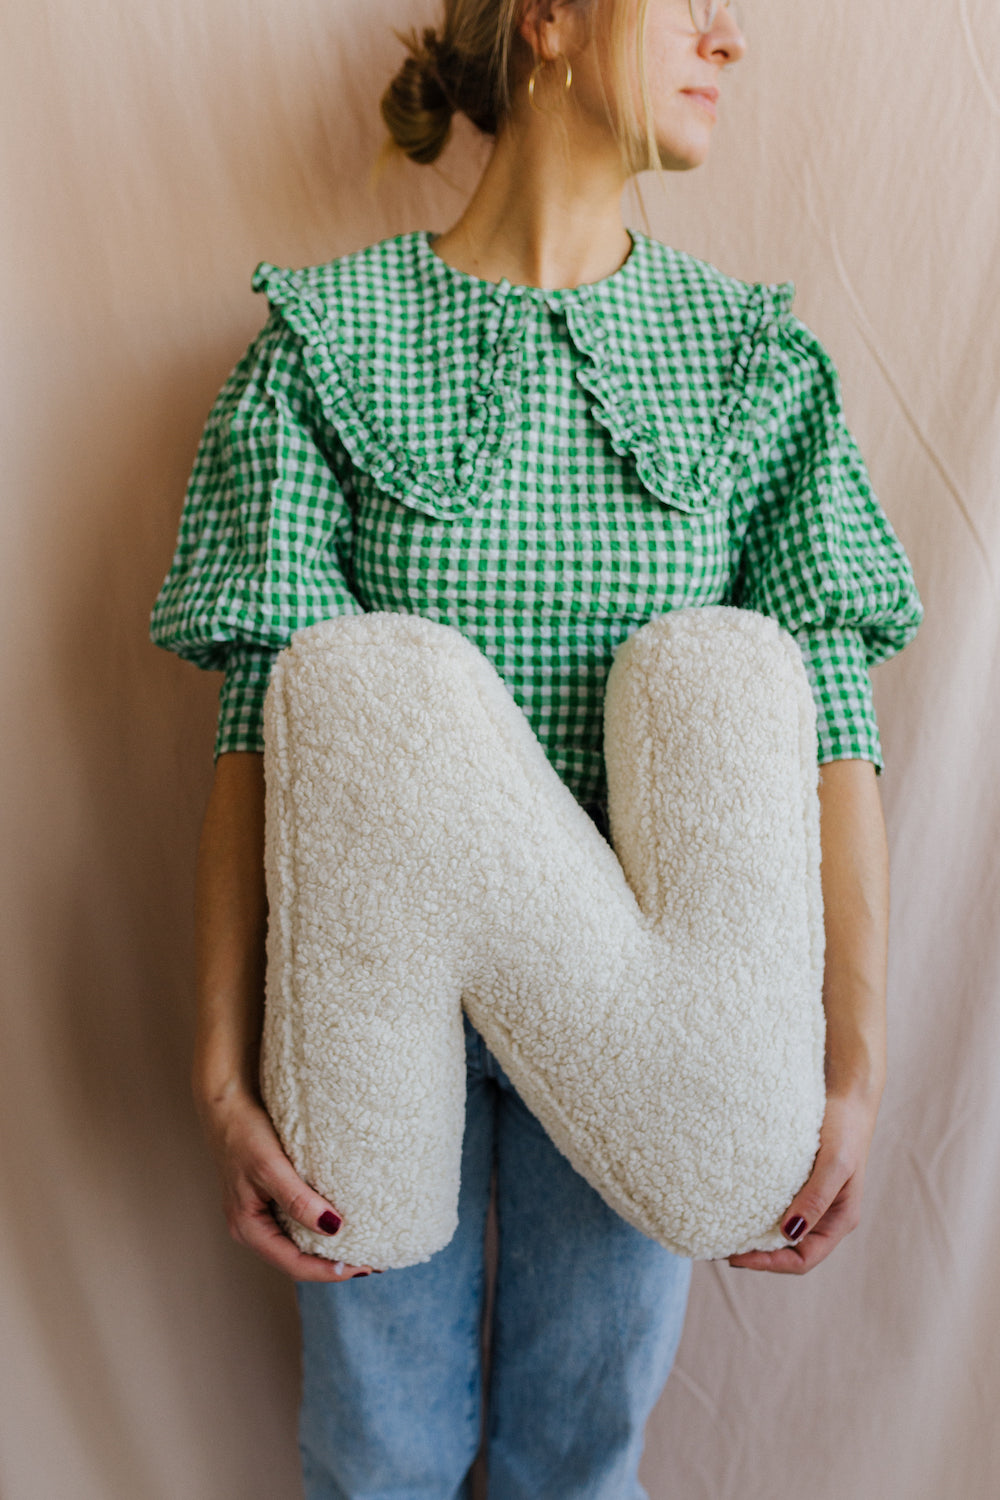 Boucle Letter cushion N by Bettys Home Teddy Letter Pillow held by young woman in green checkered shirt 